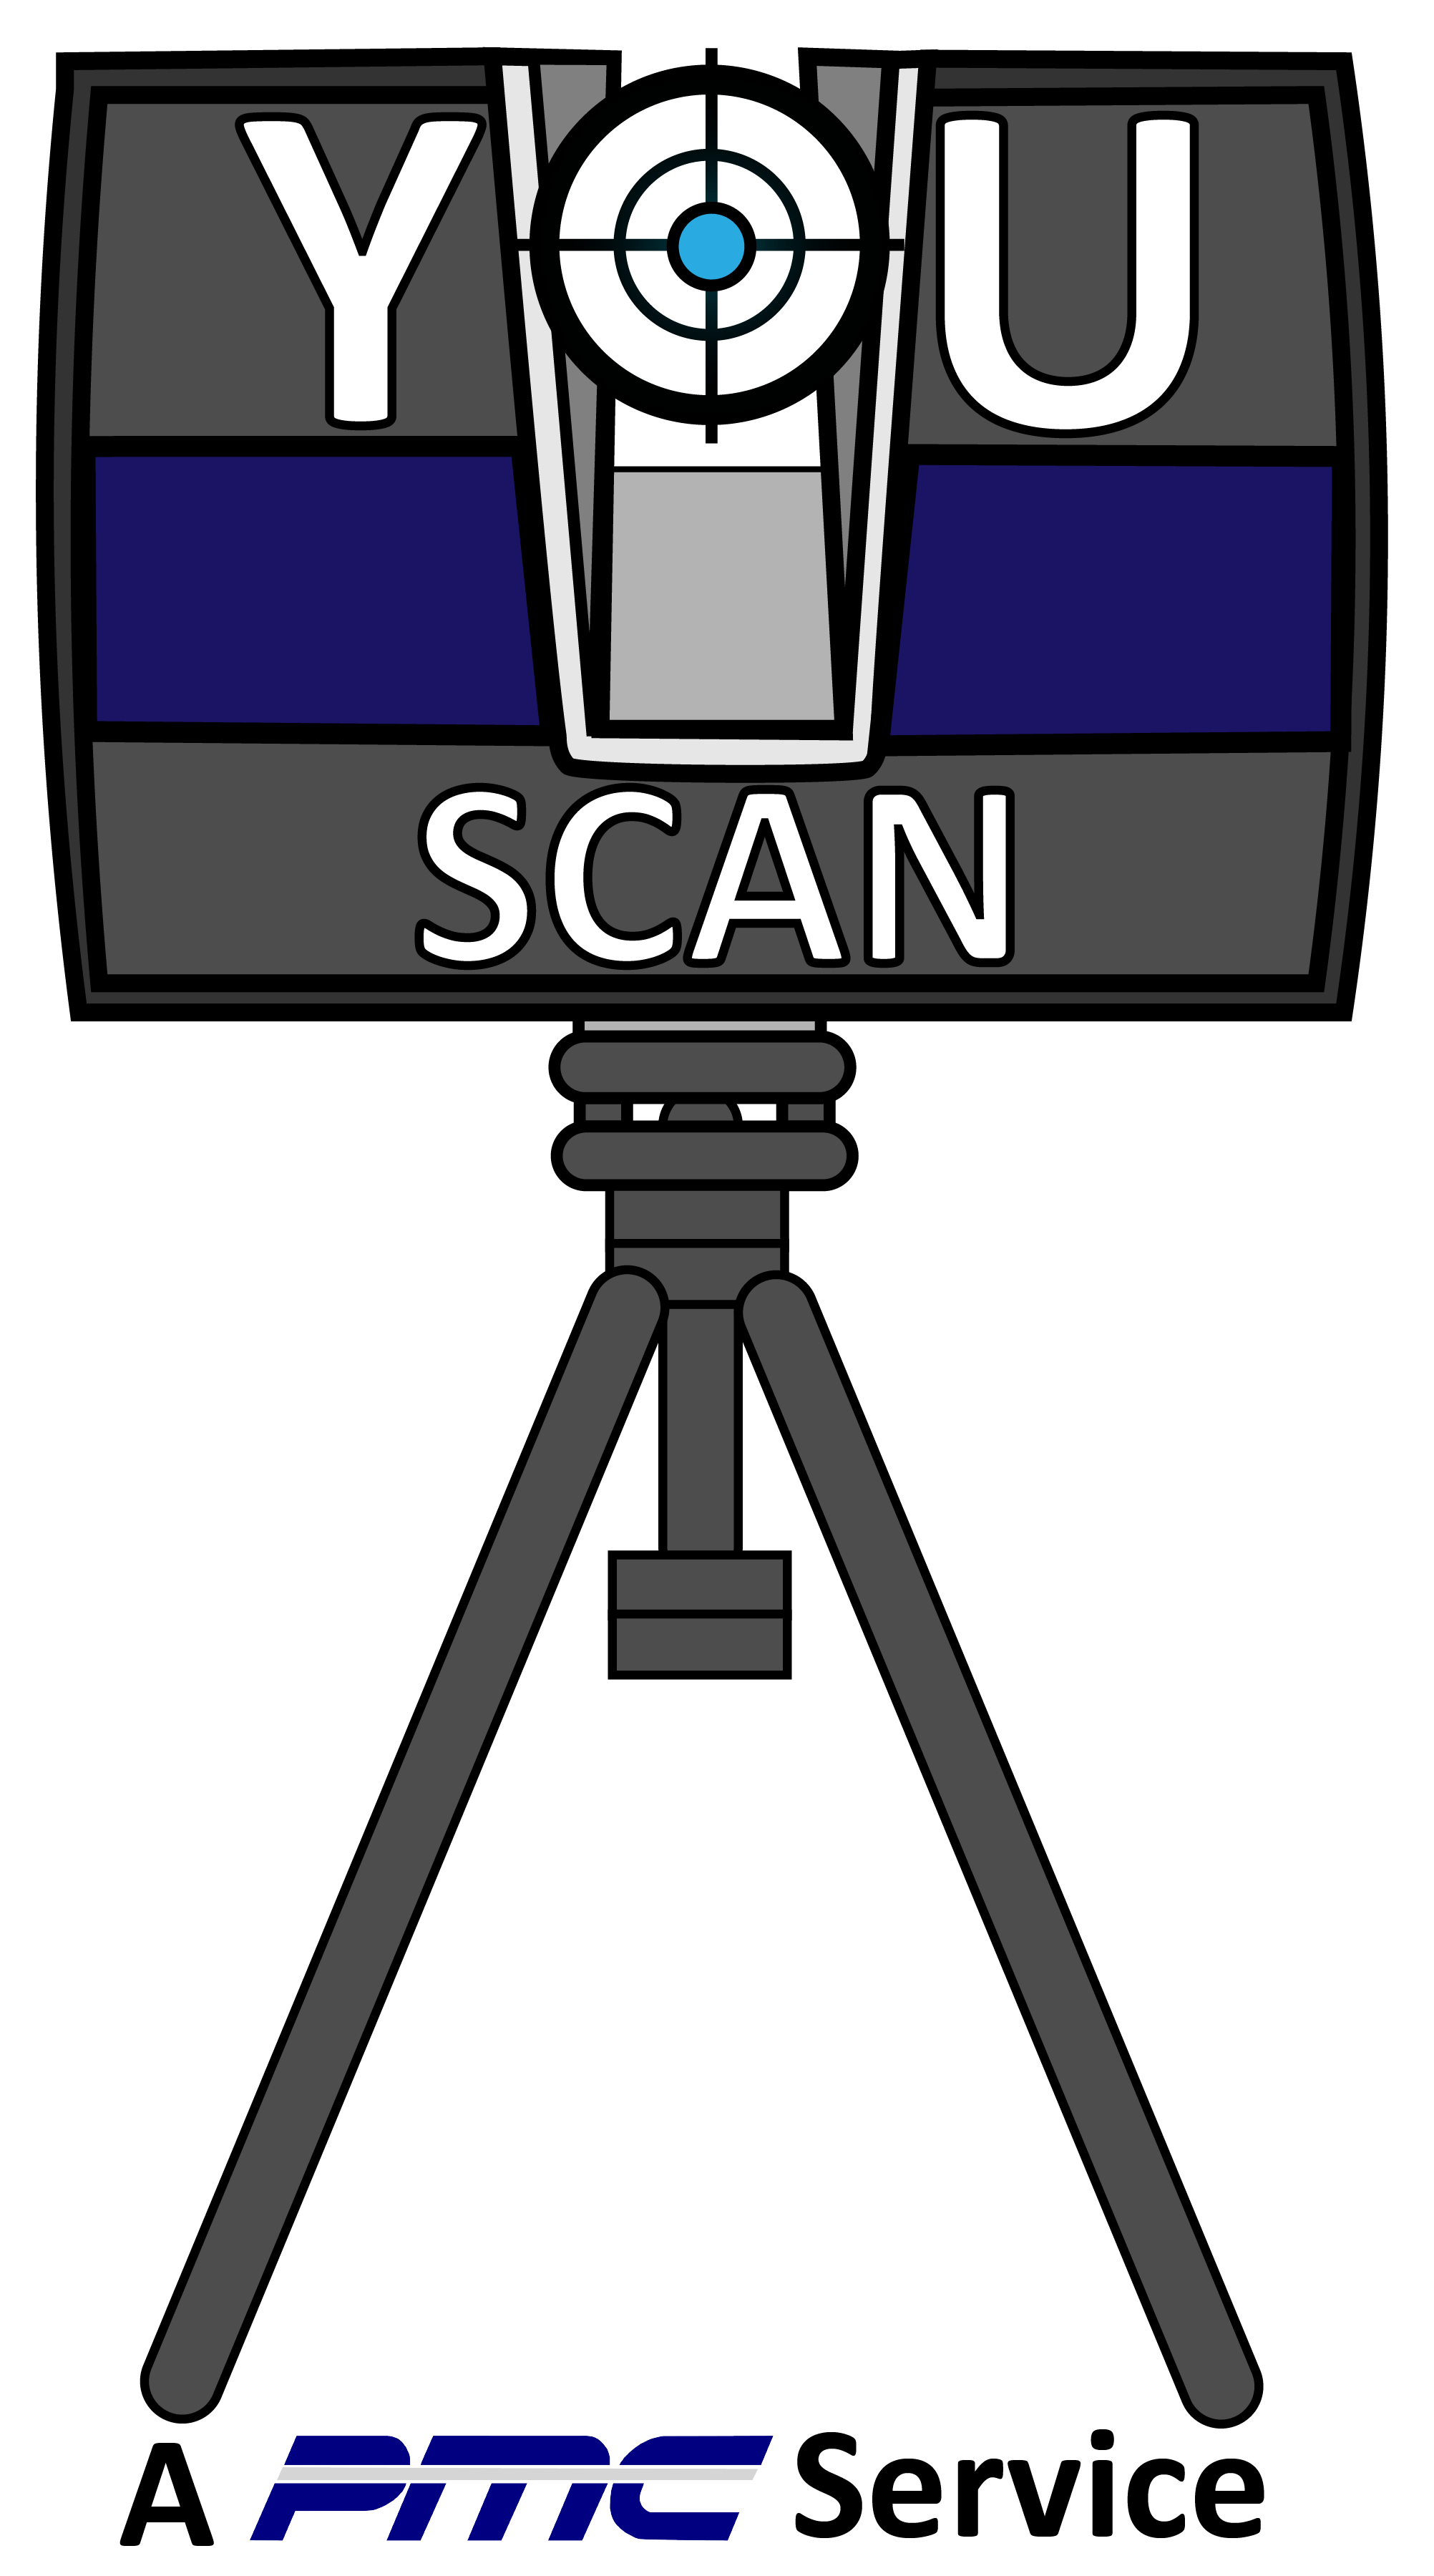 You Scan